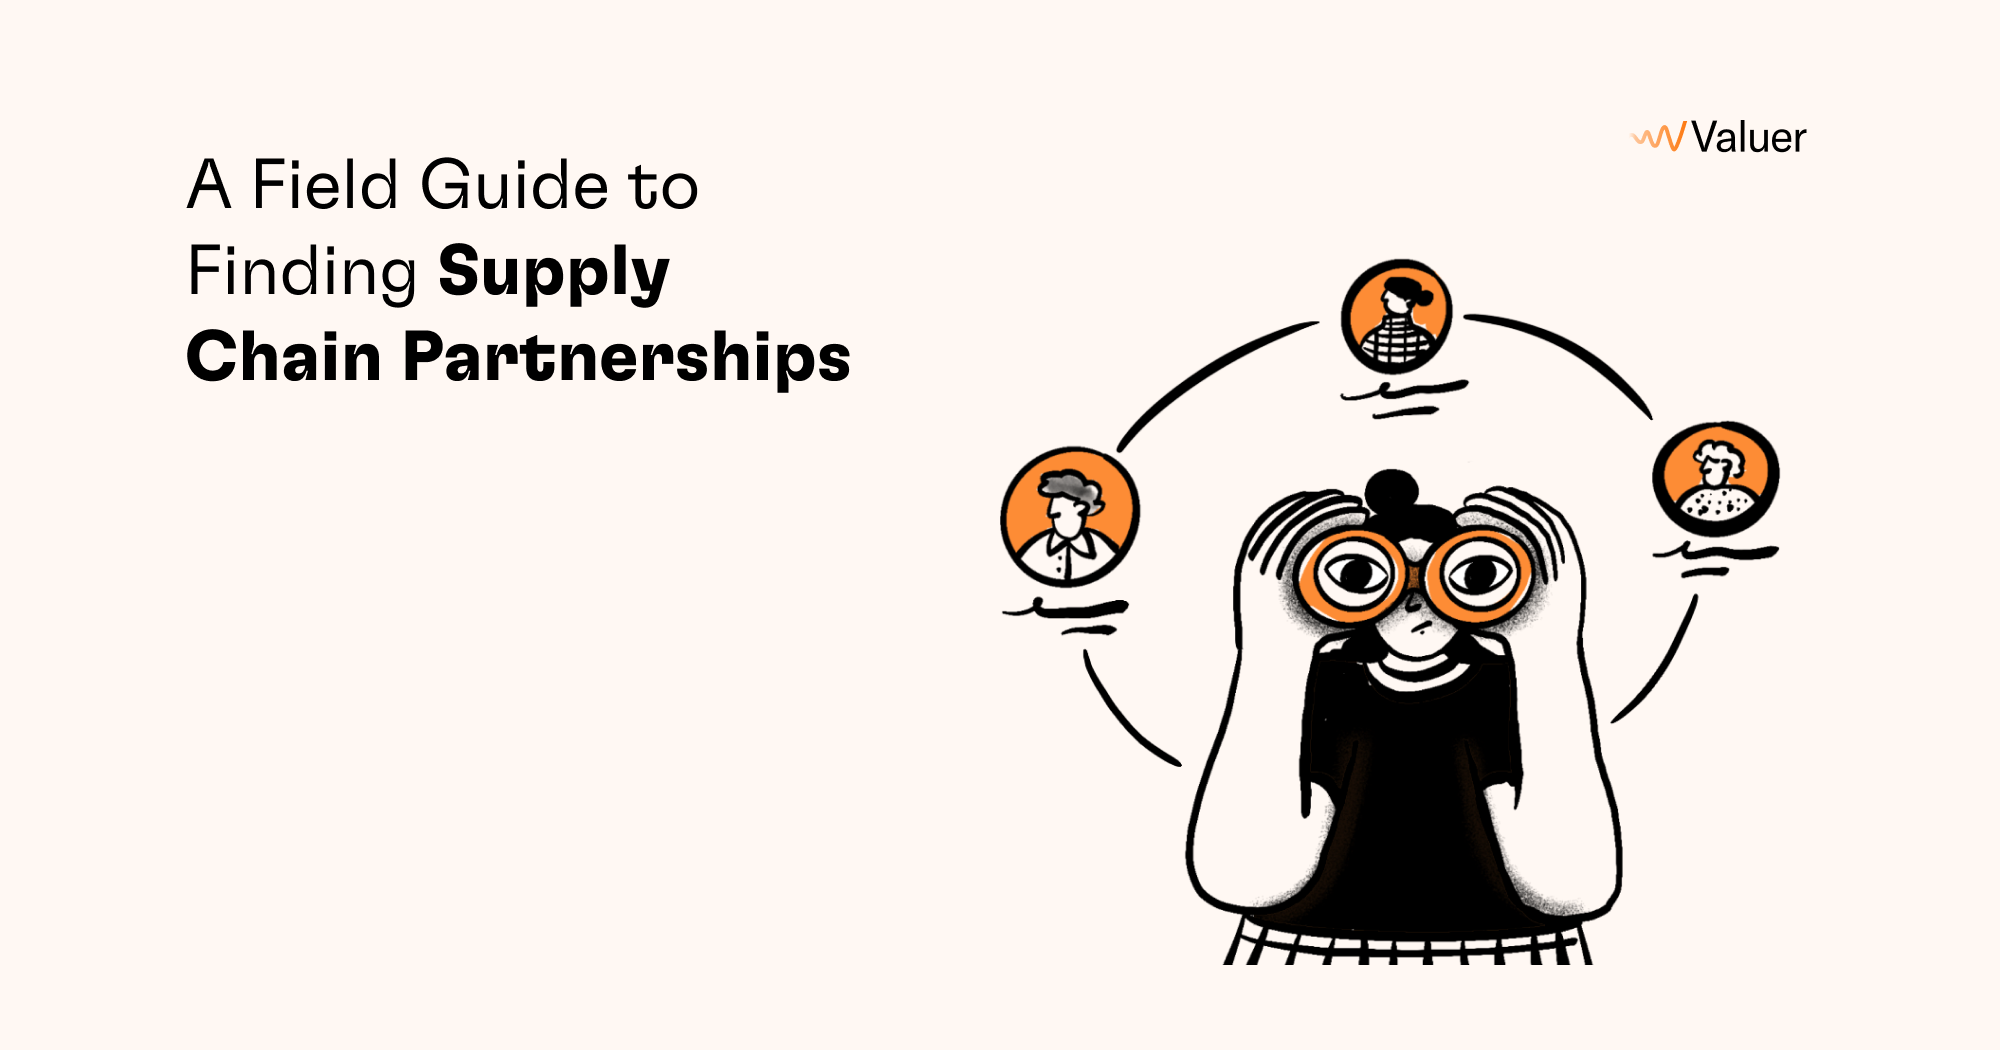 A Field Guide to Finding Supply Chain Partnerships